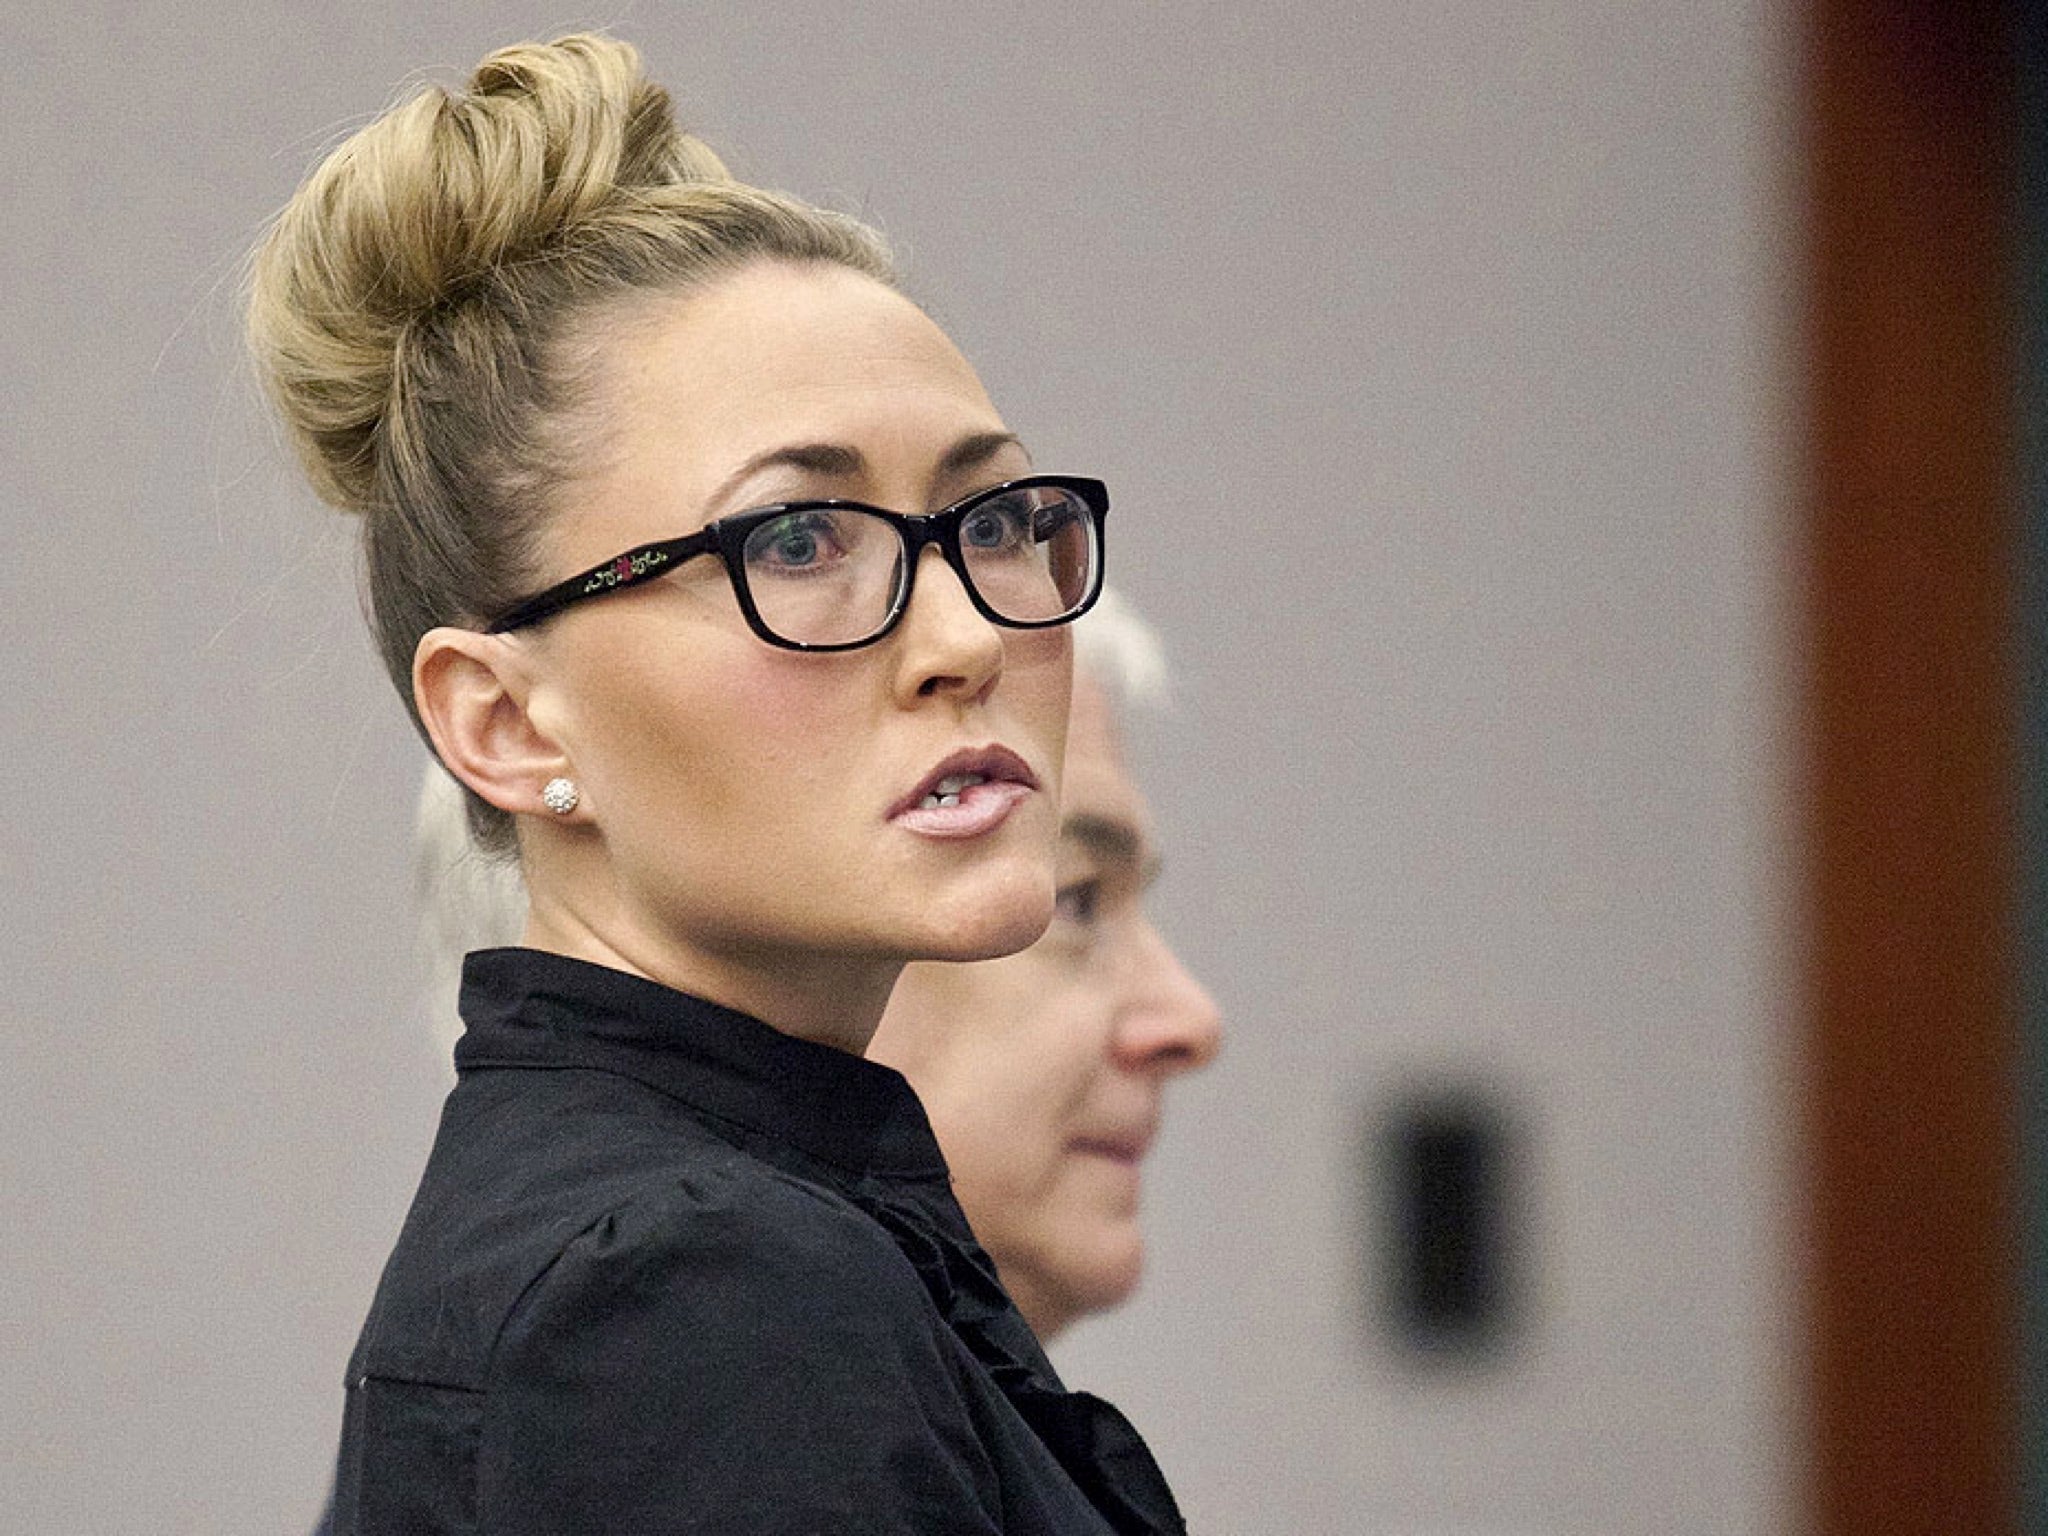 Brianne Altice weeps in court